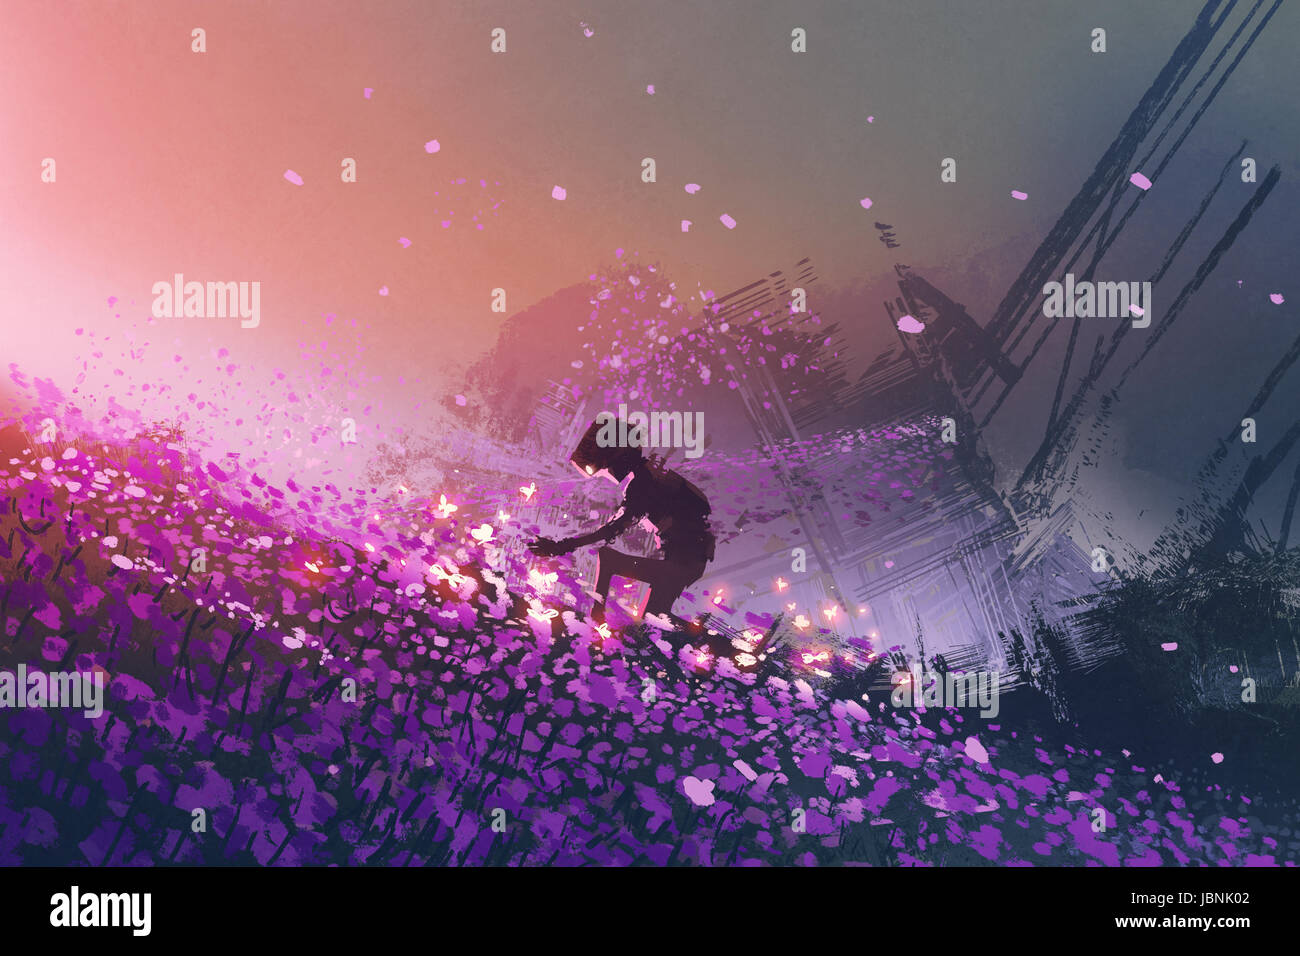 the robot sitting on purple field playing with glowing butterflies, digital art style, illustration painting Stock Photo